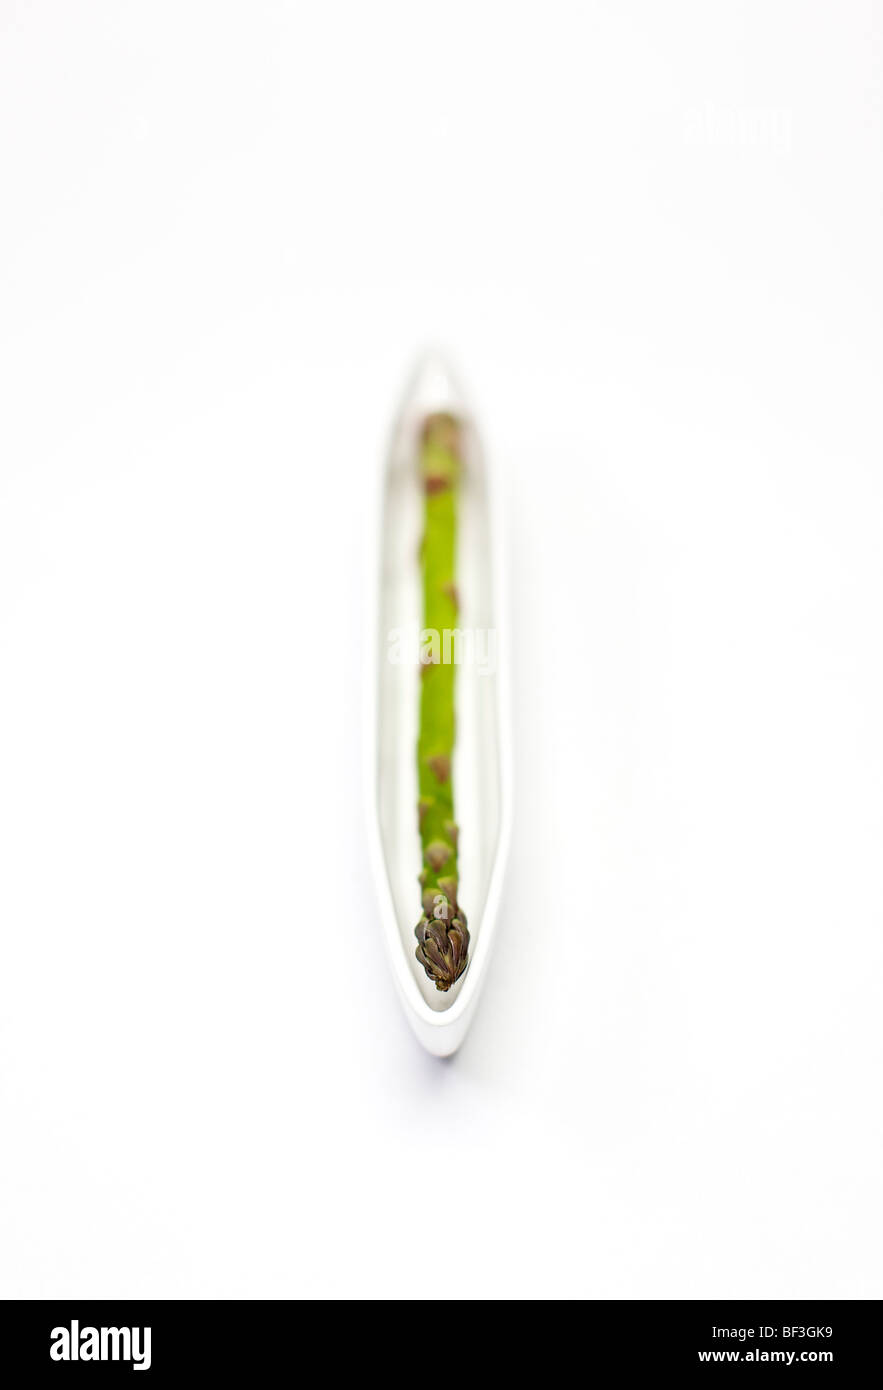 Single stick of asparagus head on in a white dish against a white backgorund Stock Photo